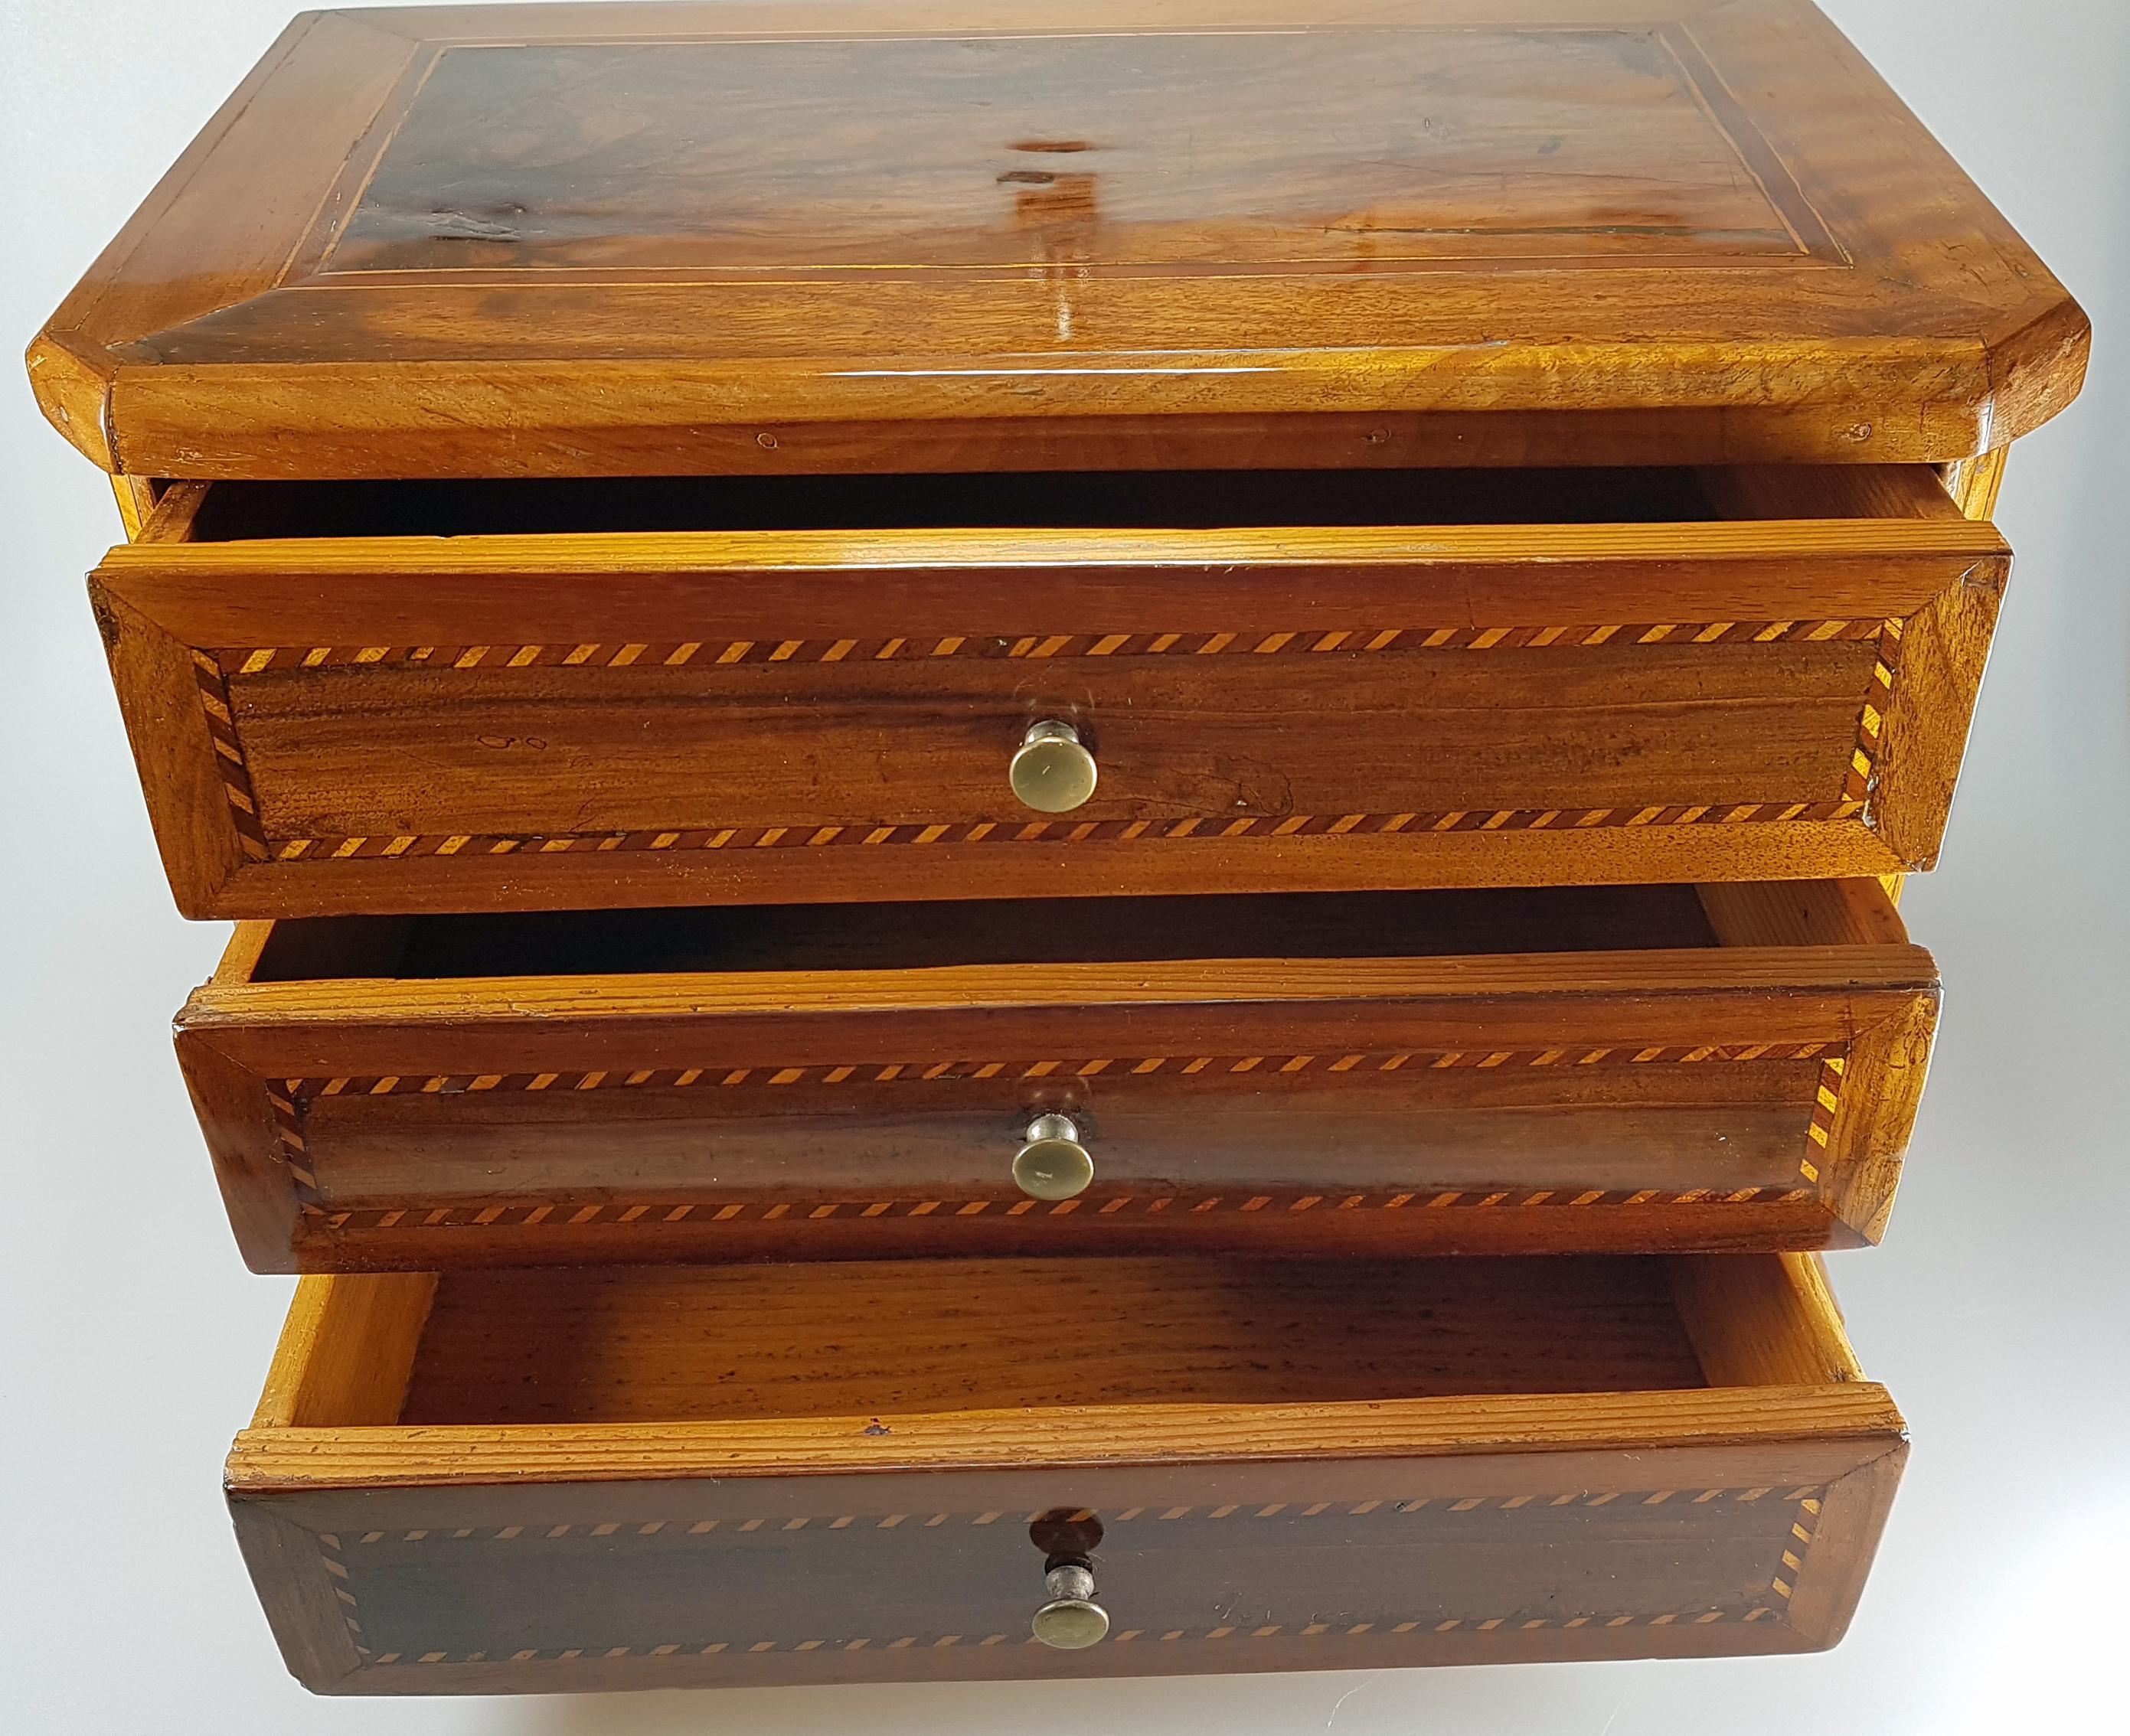 Model Furniture - Louis XVI dresser, southern Germany, 1800s. Made of walnut and other fine woods. A rare collector's item of high historical value. 

Body with chamfered corners, three drawers with circumferential fillet ribbon inlays, sides and